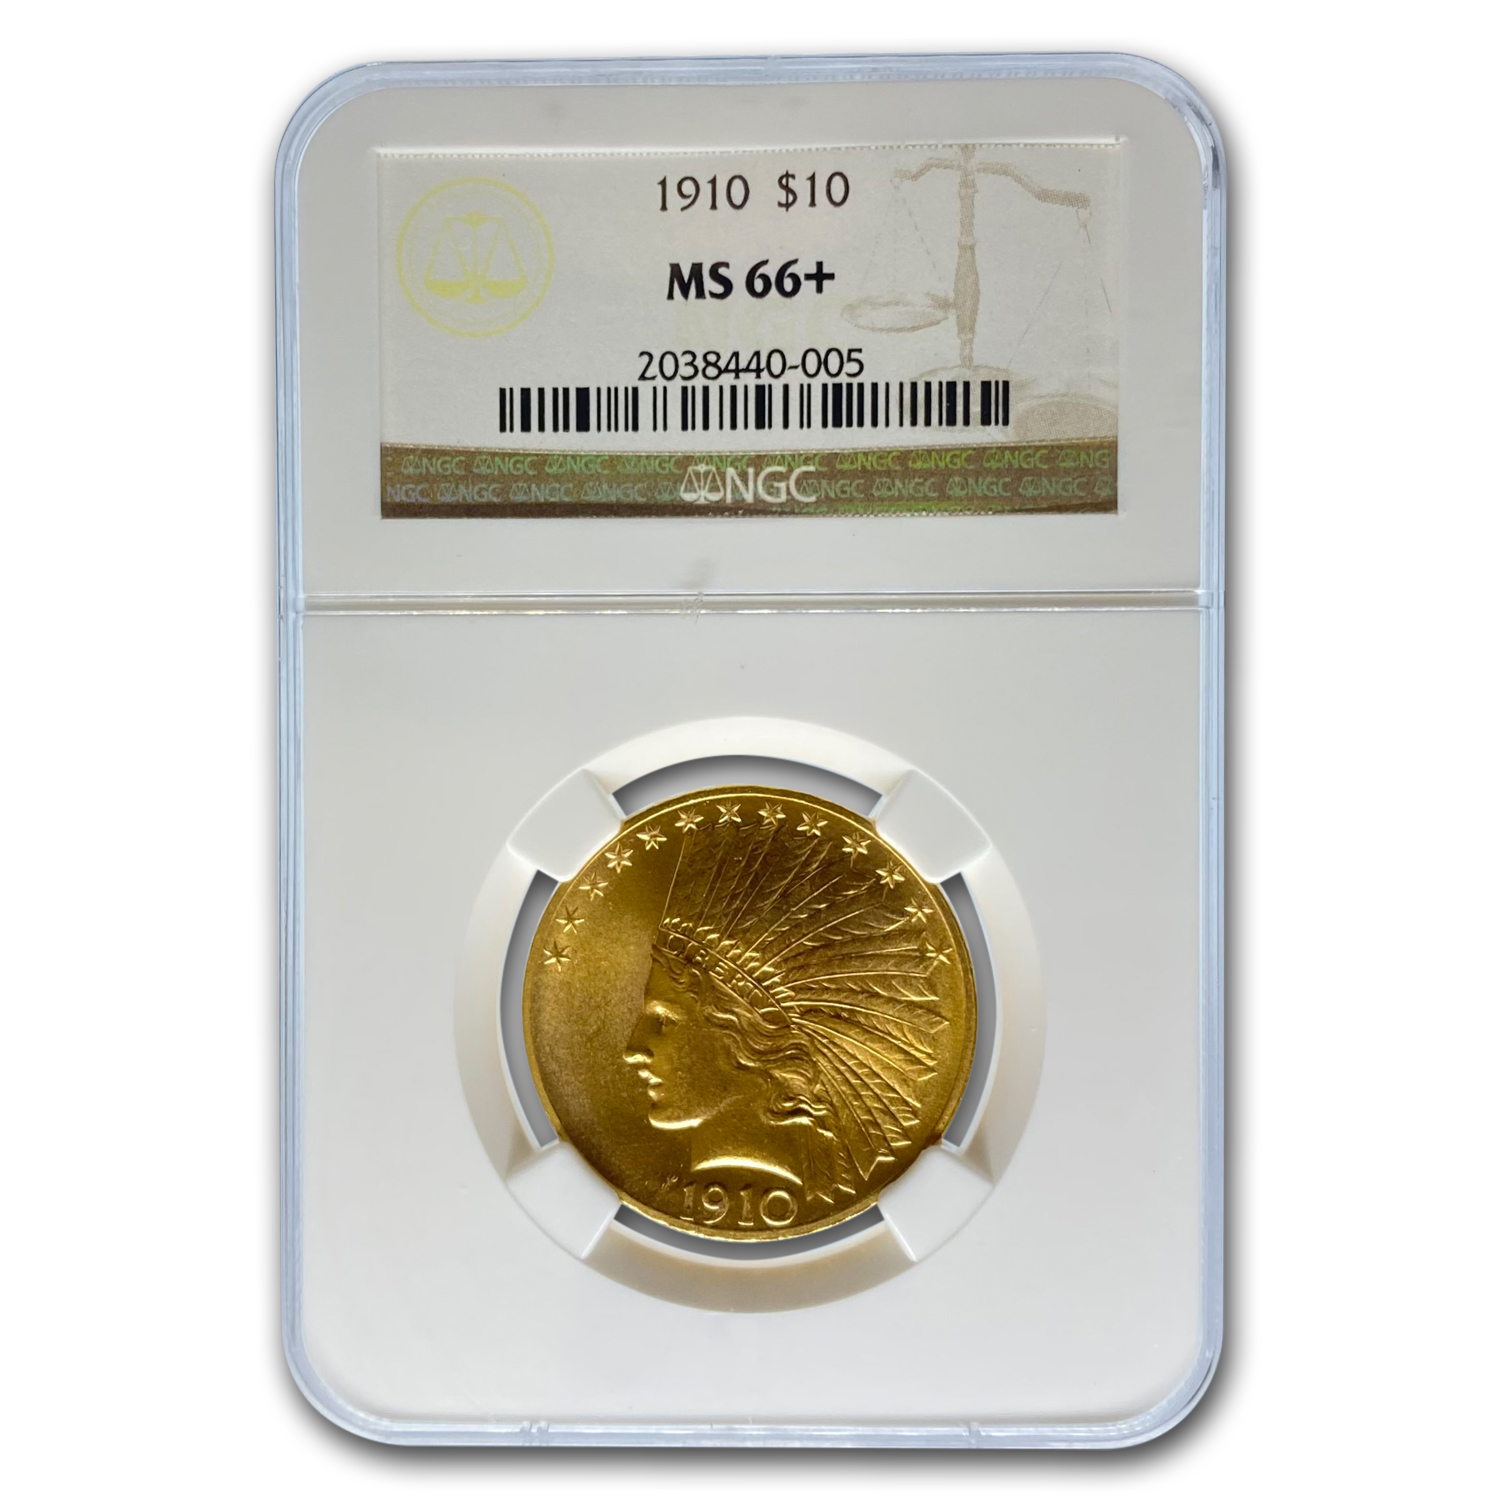 Buy 1910 $10 Indian Gold Eagle MS-66+ NGC